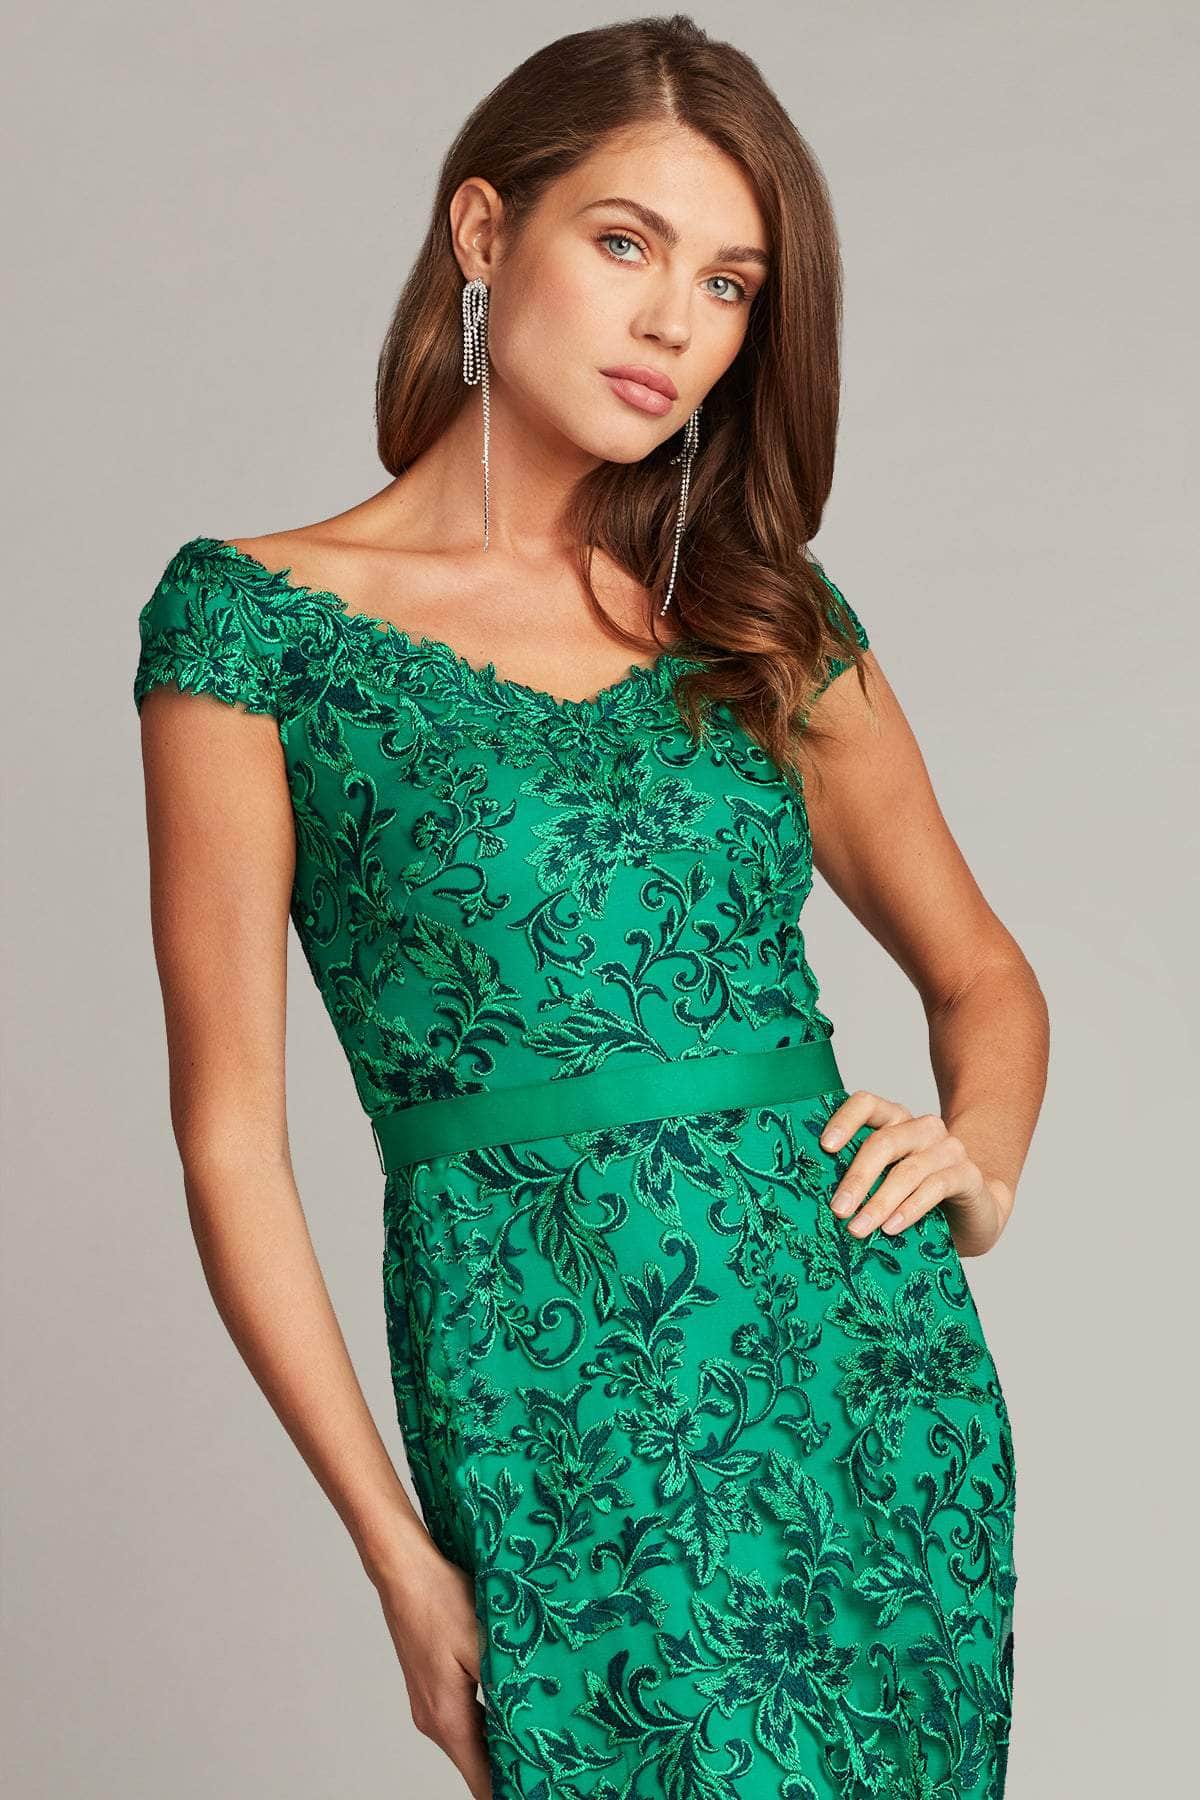 Lace Illusion Neckline Dress from Camille La Vie and Group USA